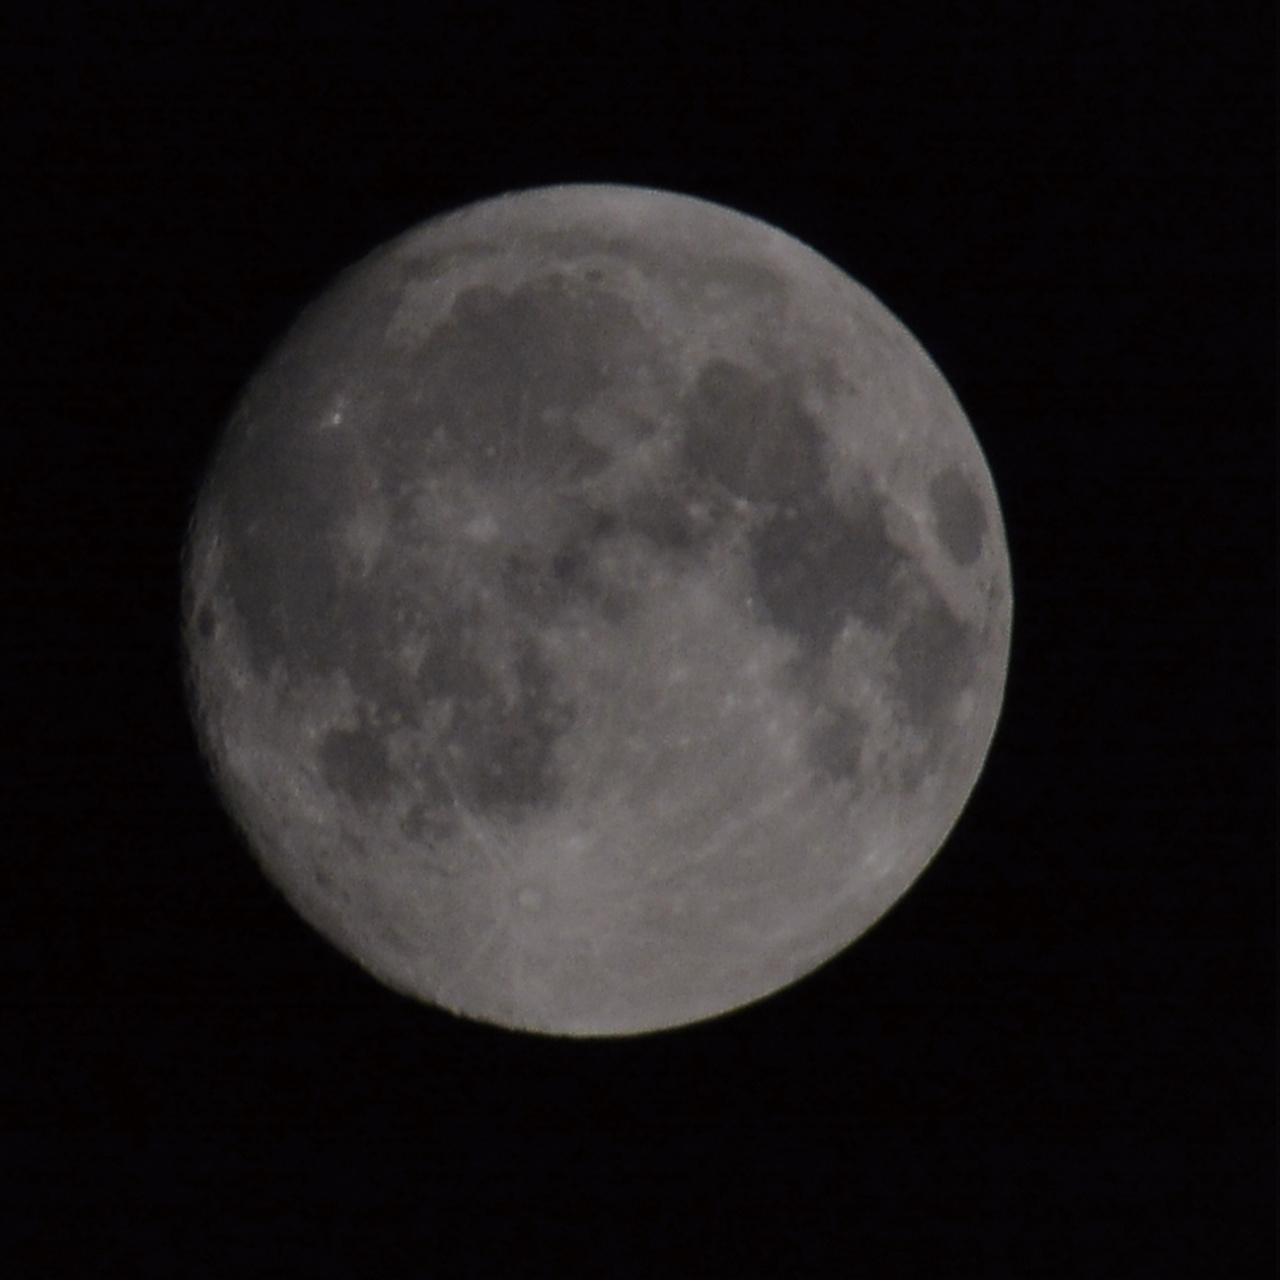 Free Images : atmosphere, night sky, full moon, circle, lunar surface ...